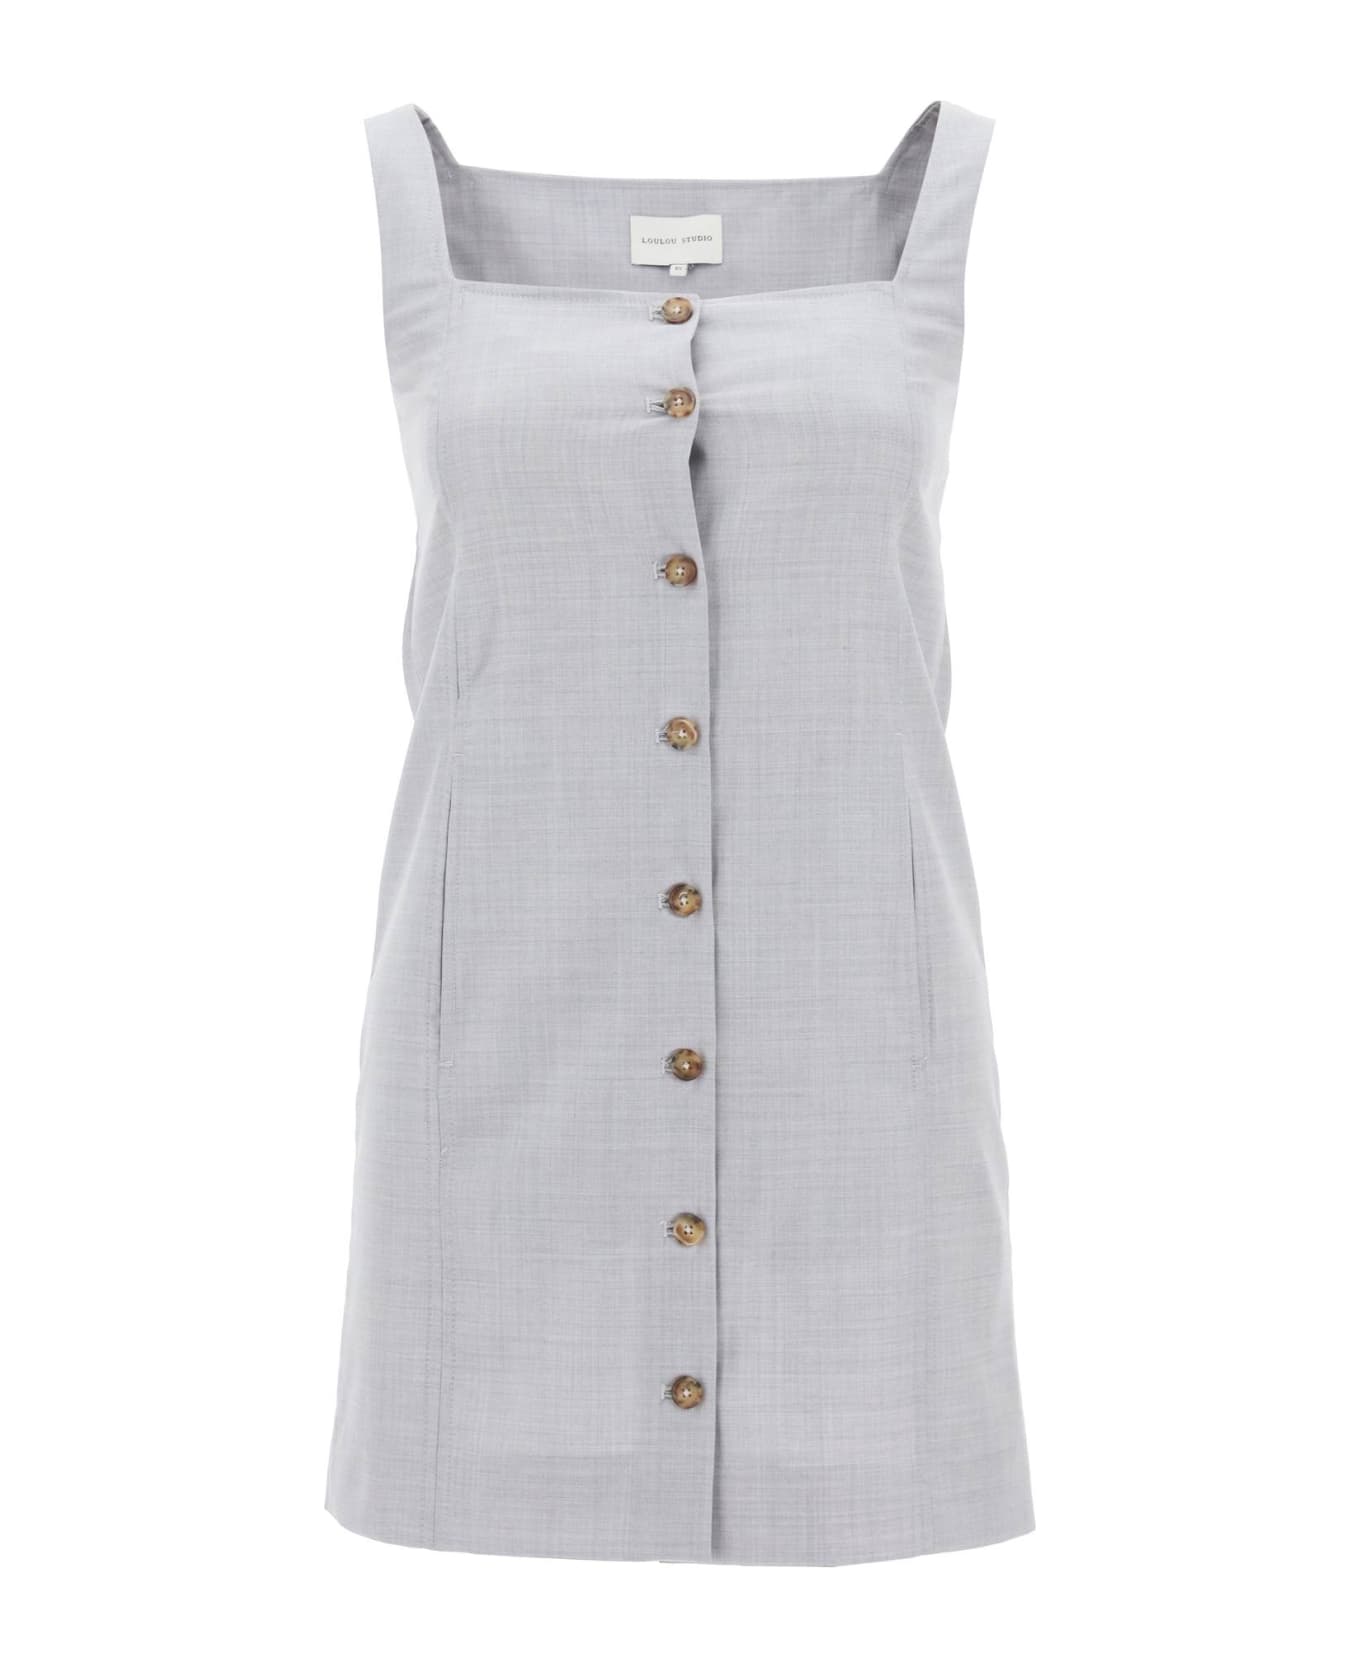 Loulou Studio Buttoned Pinafore Dress - FEATHER GREY MELANGE (Grey)